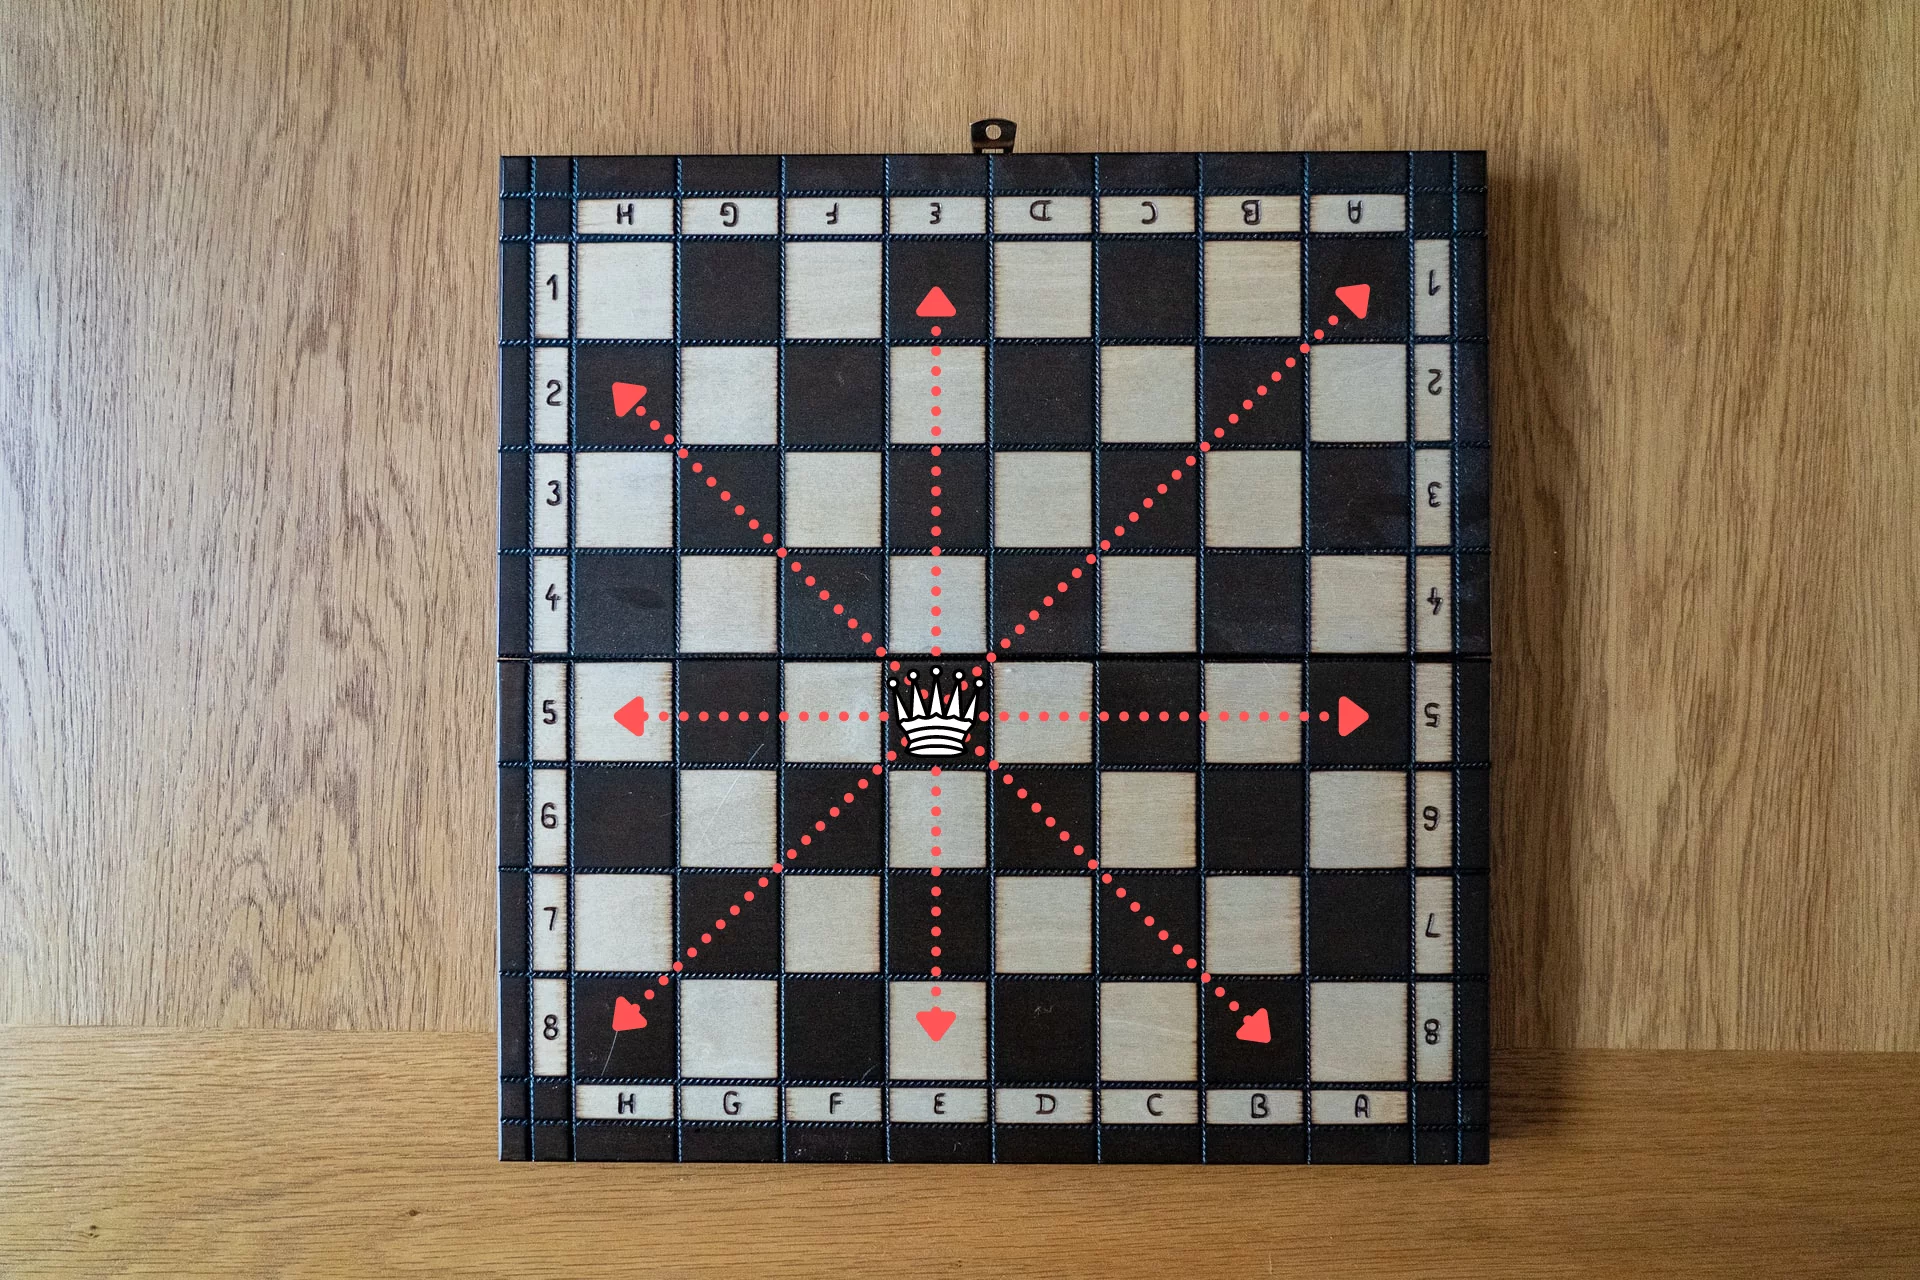 A chessboard seen from above with a queen in the centre and lines showing the positions under attack.